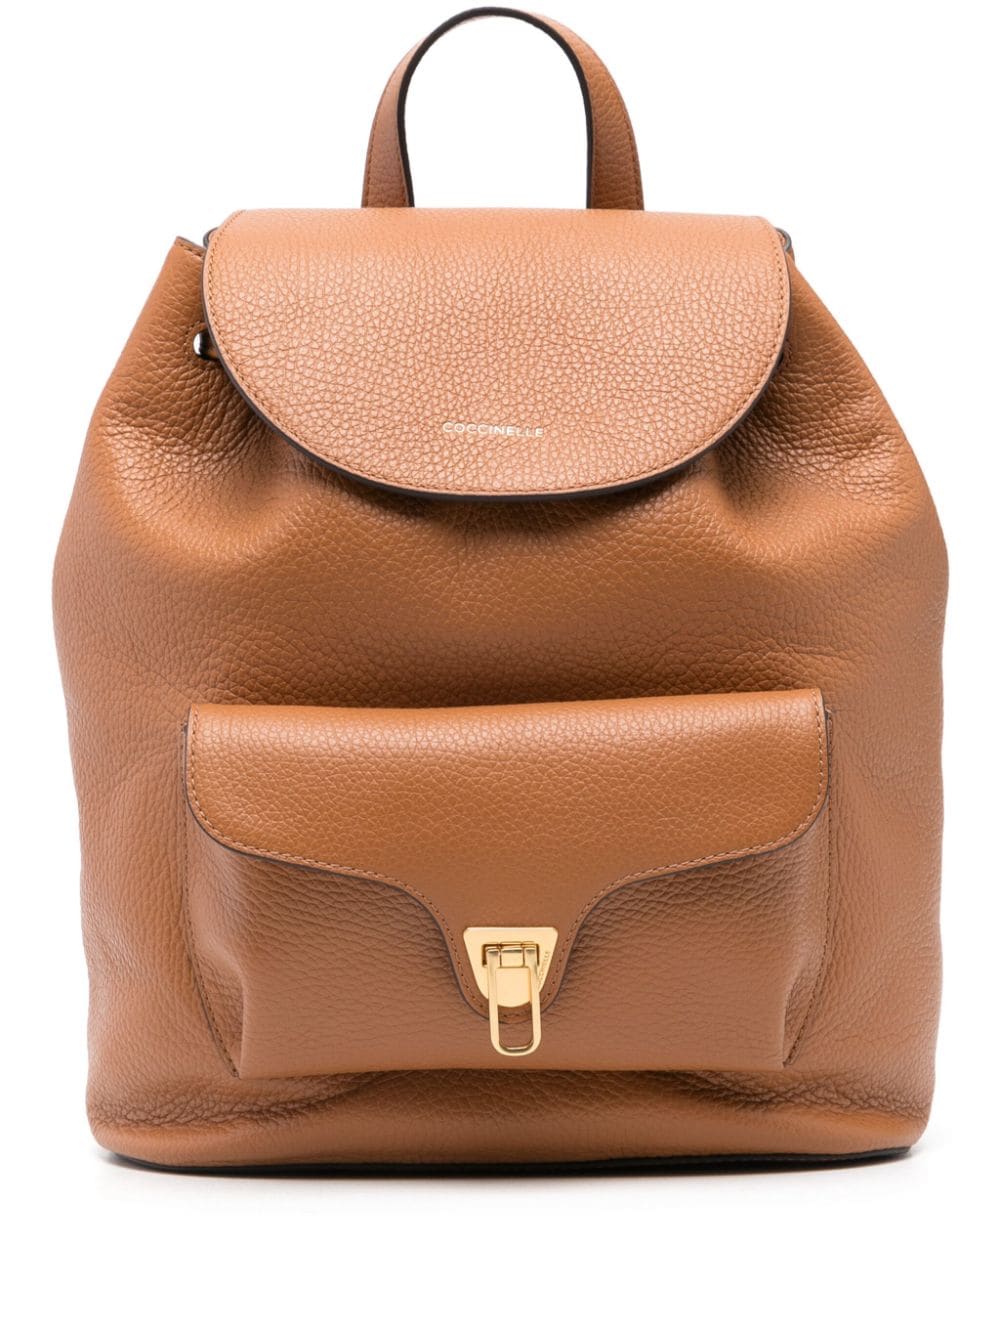 Coccinelle Beat leather backpack - Brown von Coccinelle